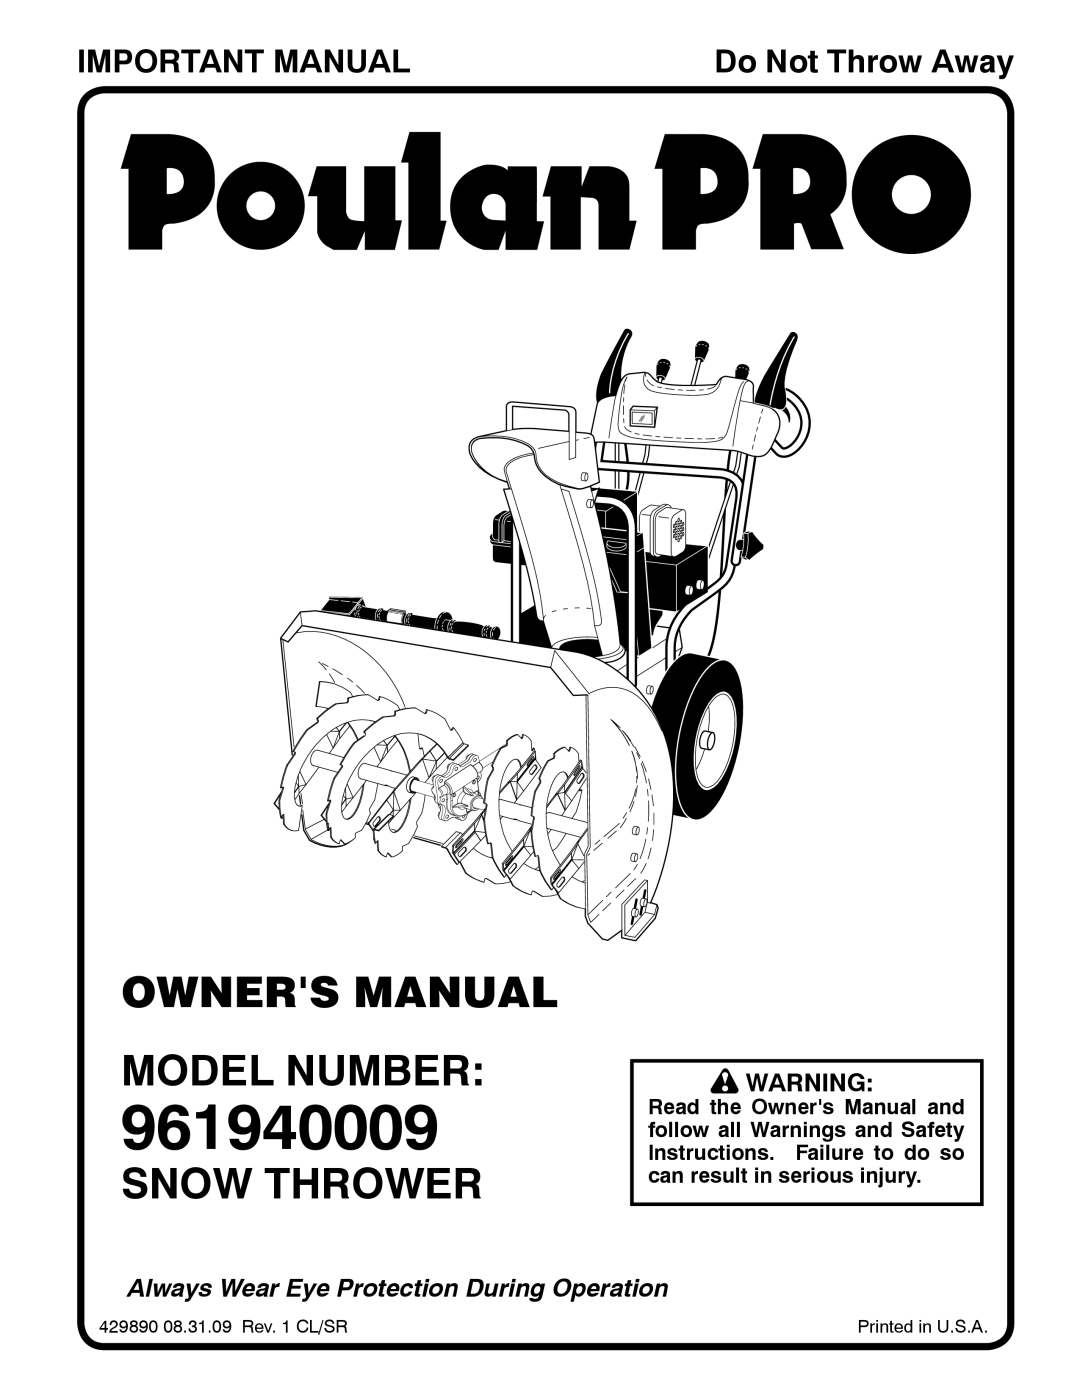 Poulan 429890 owner manual Owners Manual Model Number, Snow Thrower, Important Manual, 961940009, Do Not Throw Away 